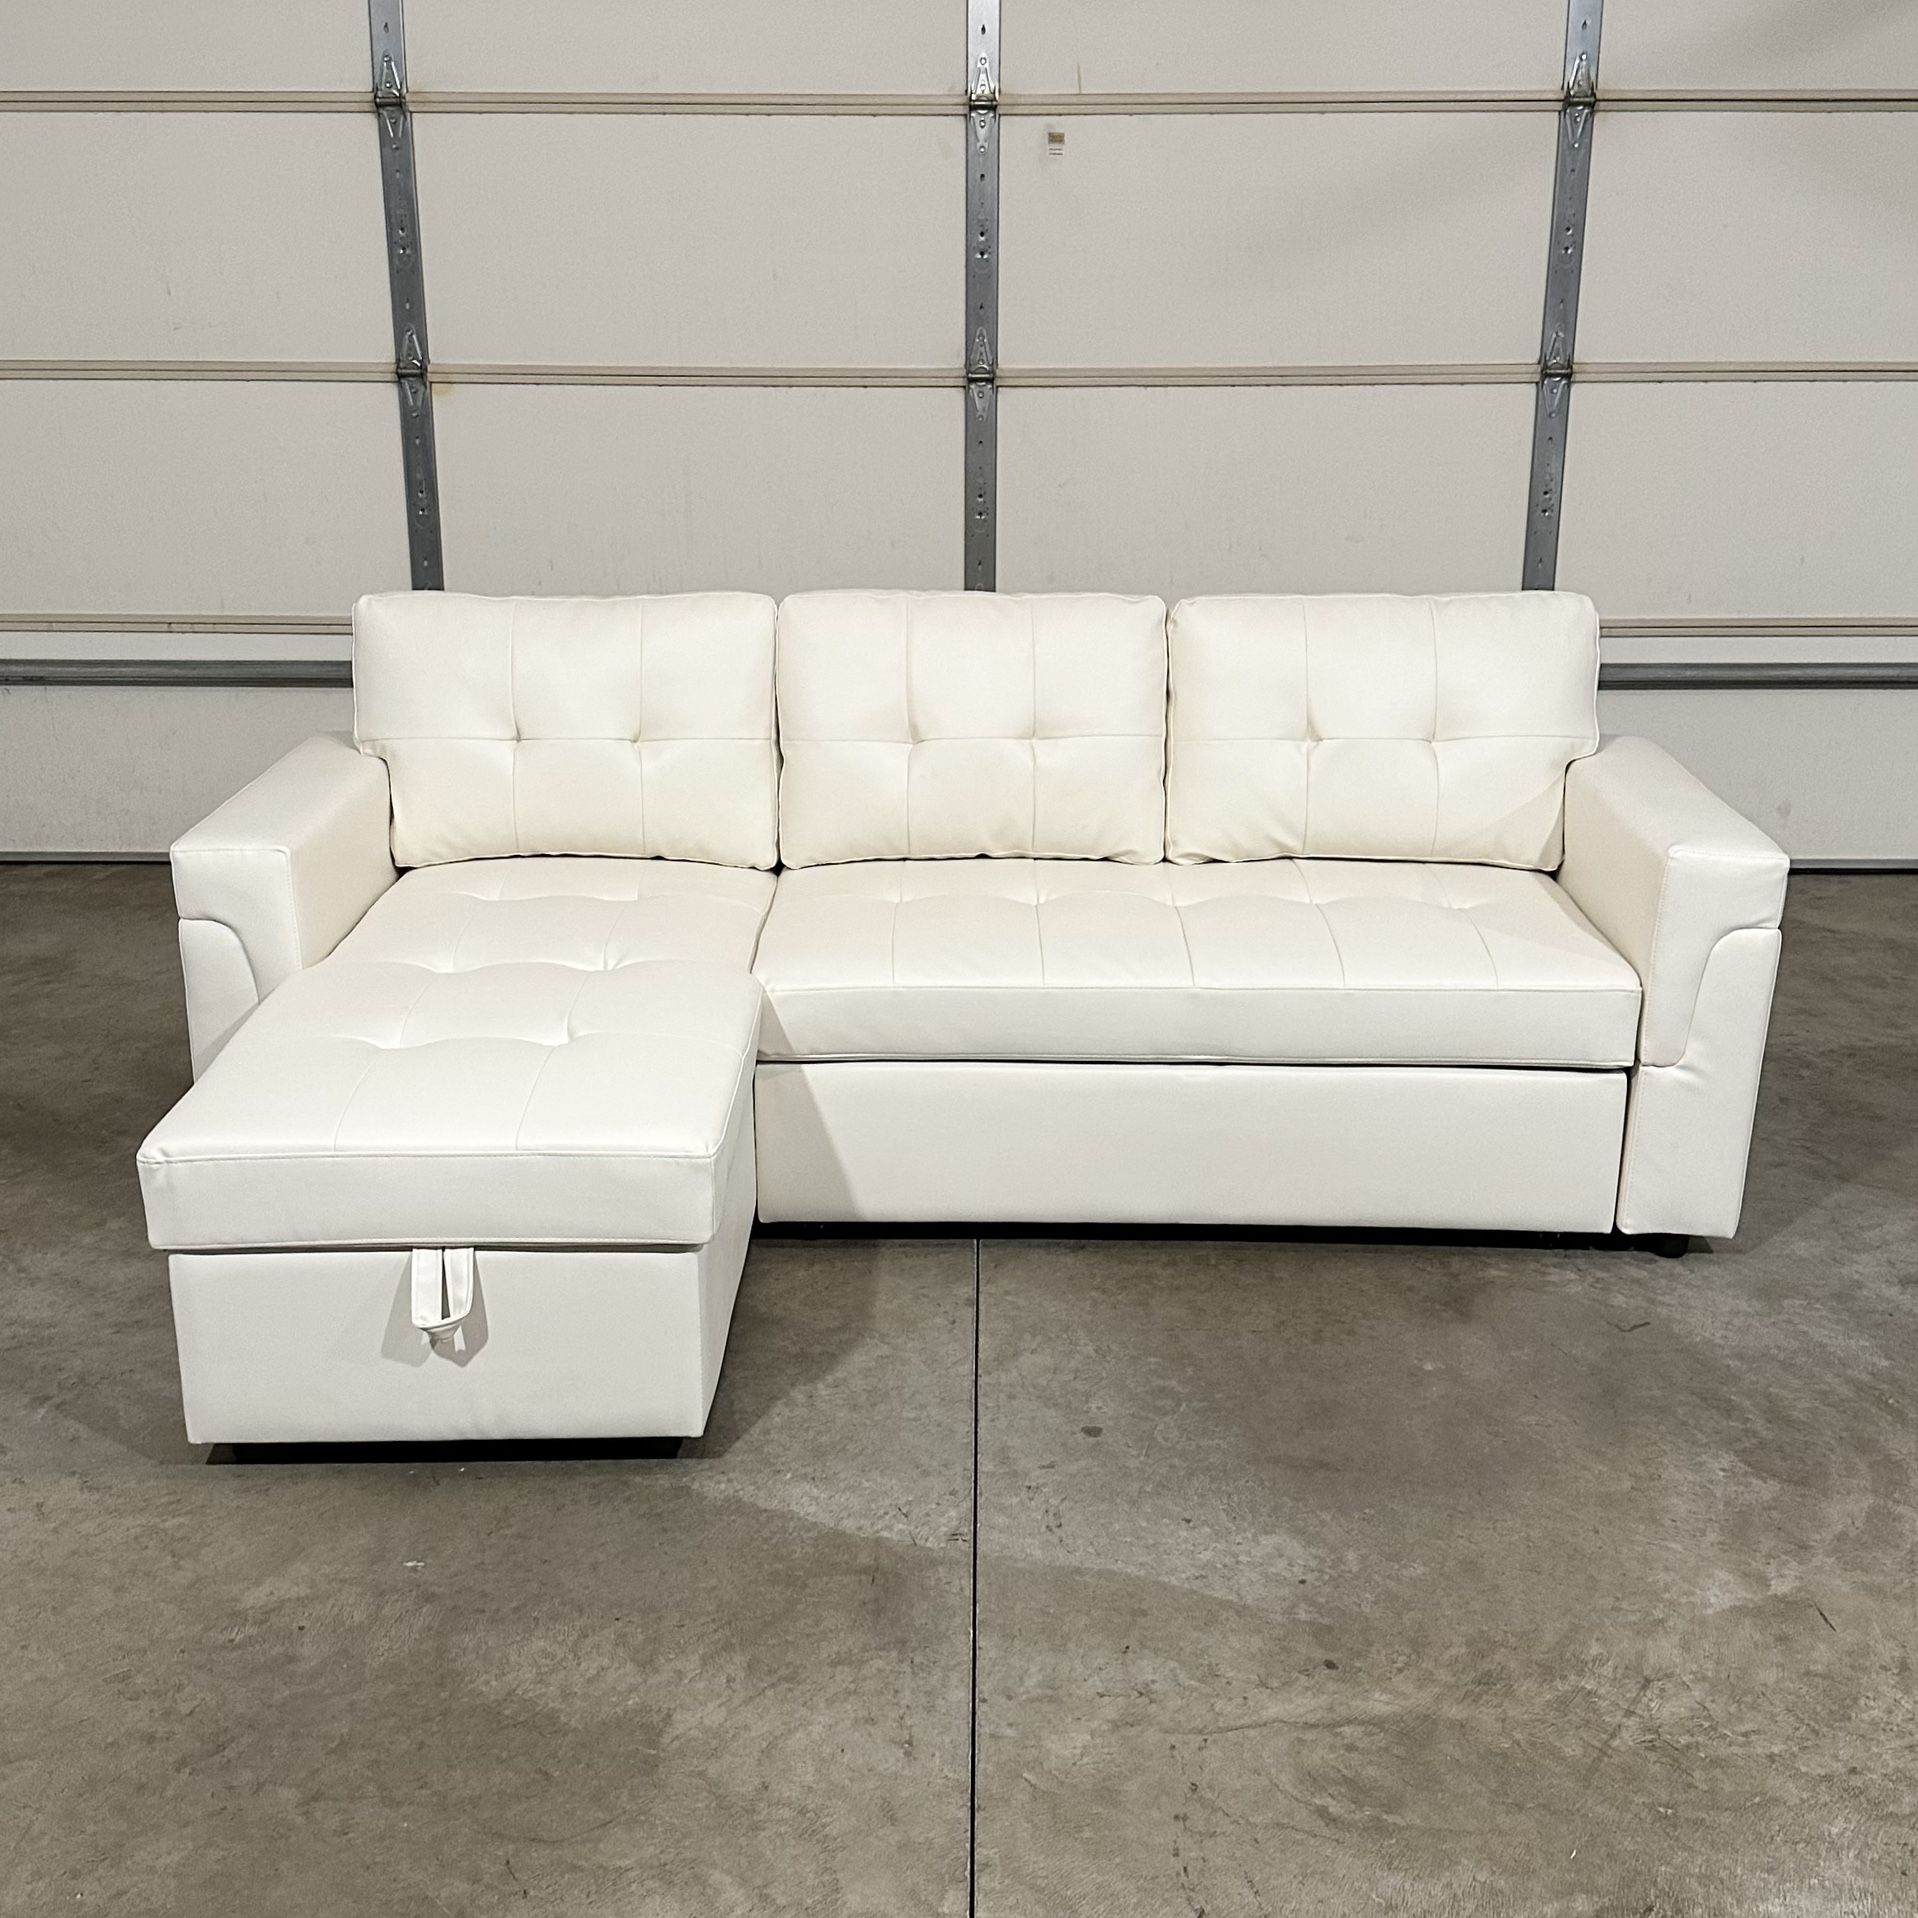 New White Leather Couch / Sofa (Free Delivery)